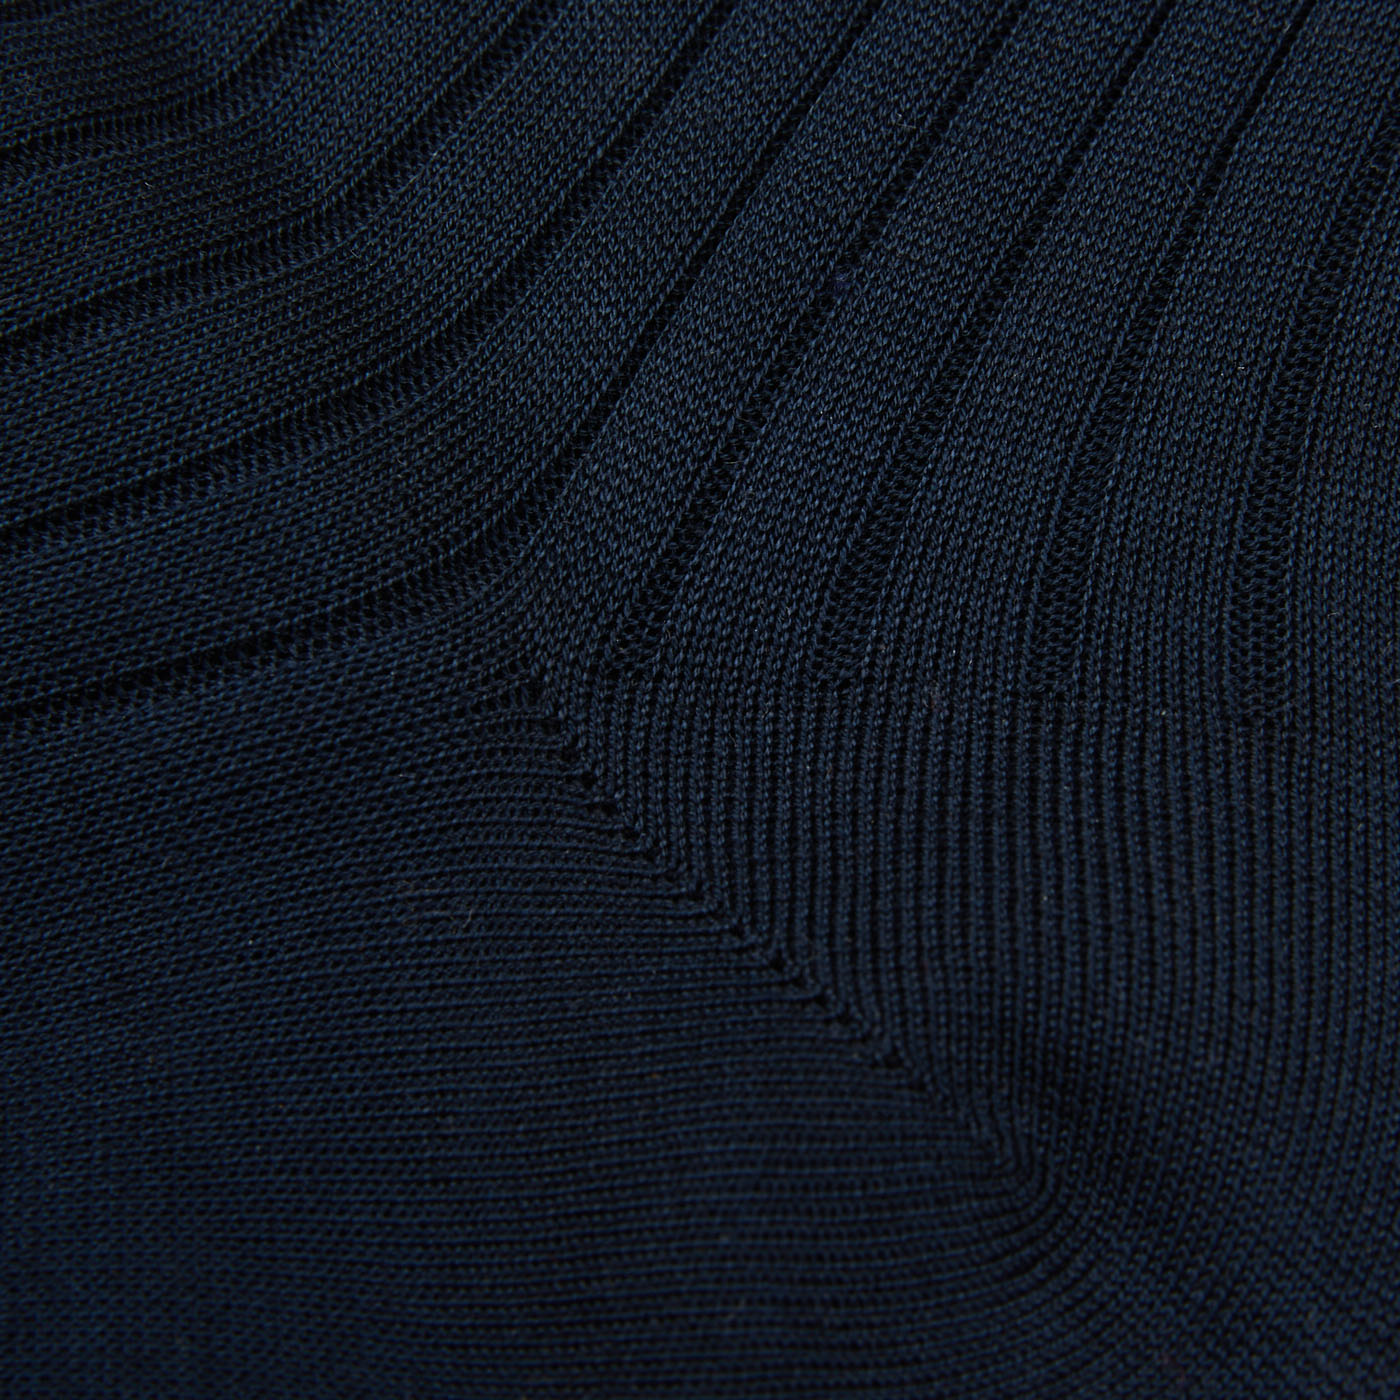 A close-up image of Canali navy blue knee long ribbed cotton socks.